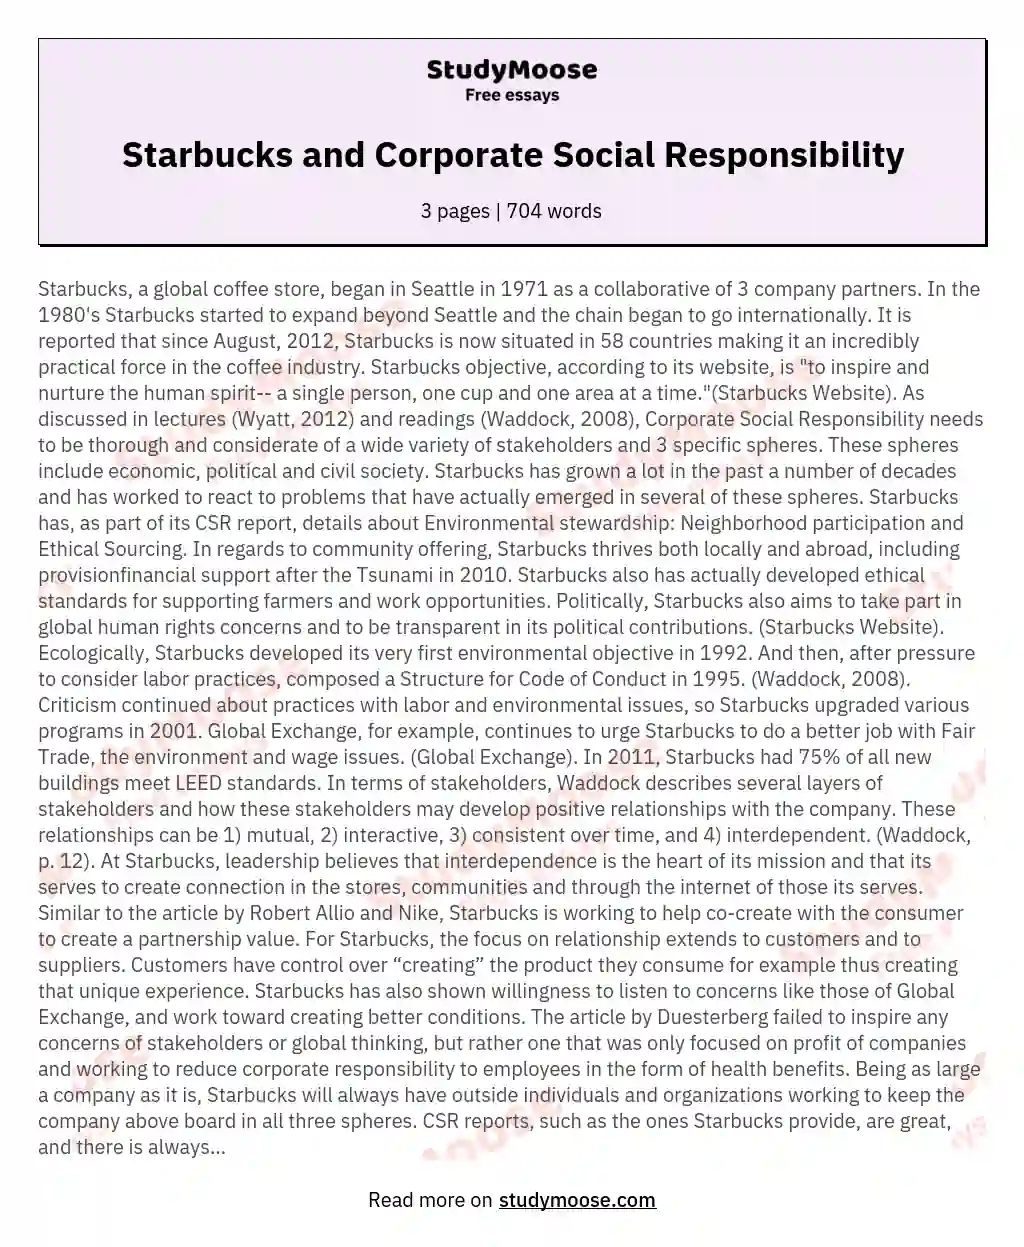 Starbucks and Corporate Social Responsibility essay